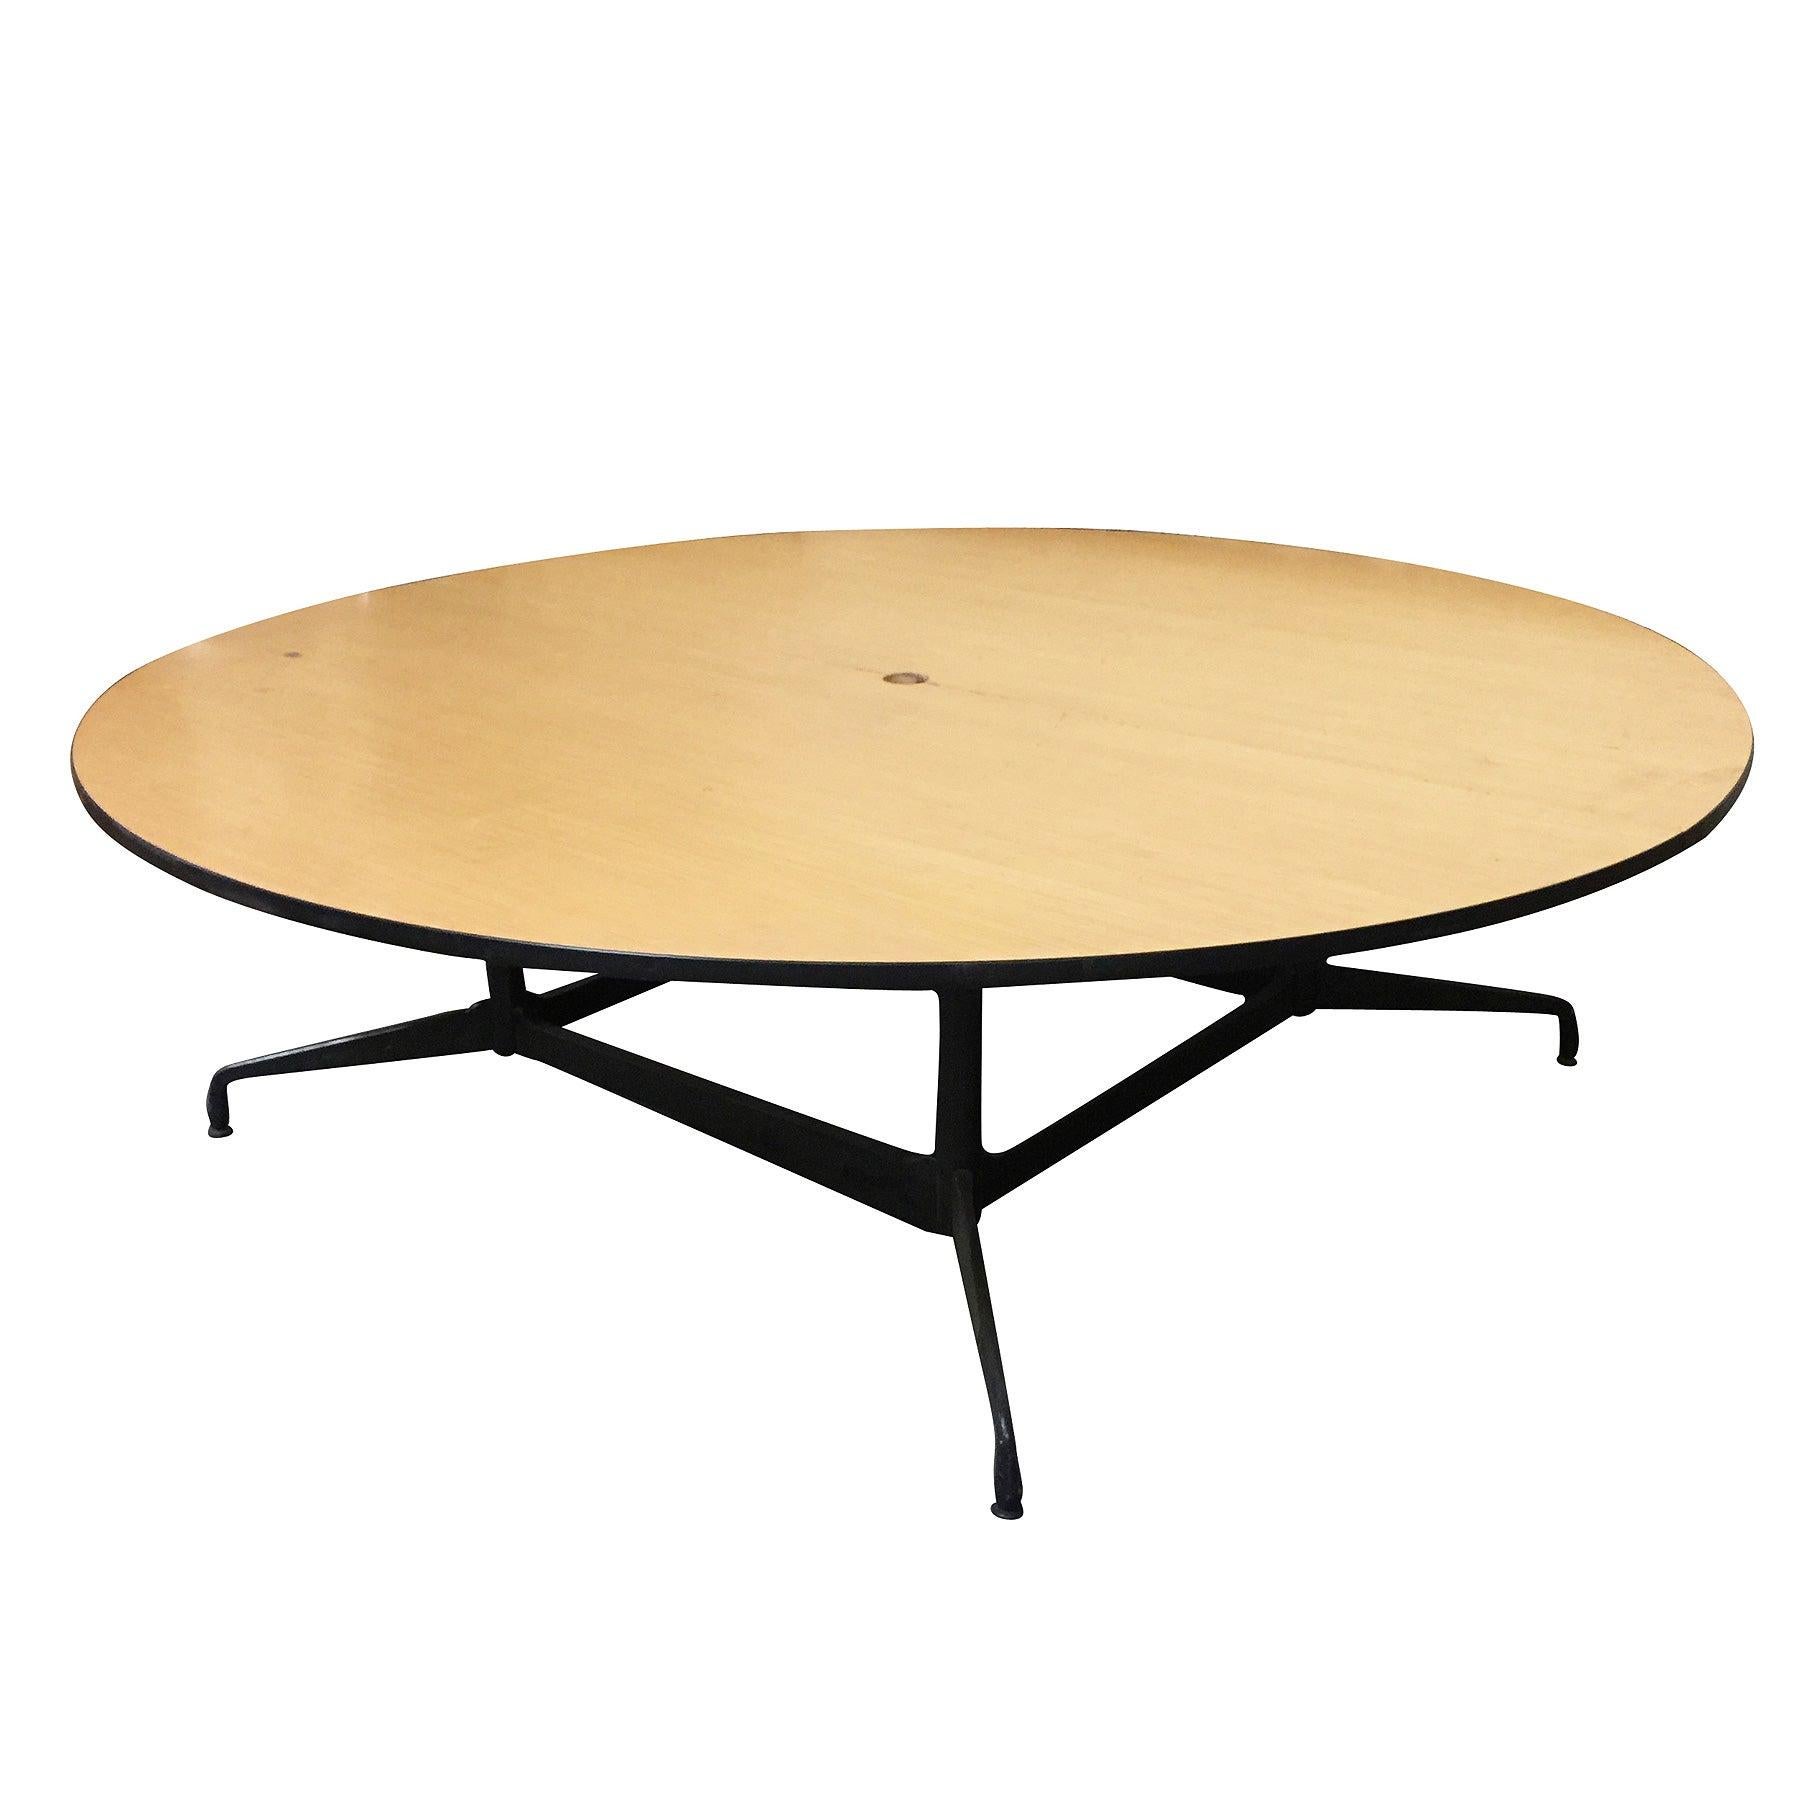 Charles and Ray Eames Round Conference Table by Herman Miller